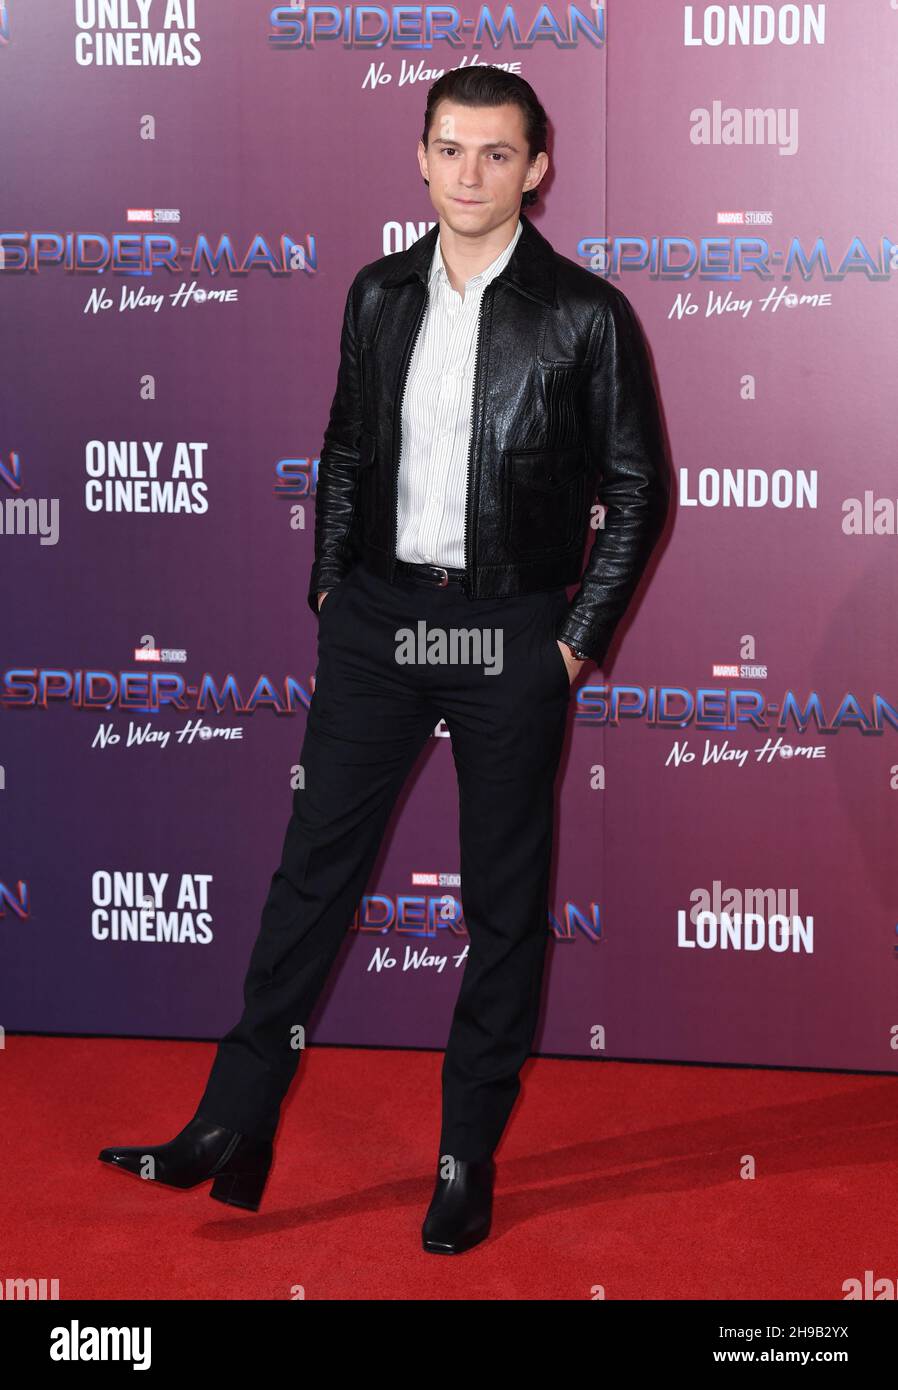 London, UK. 05th Dec, 2021. Tom Holland at the Spider-Man No Way Home Photocall, on November 9th, 2021 in London, UK. Photo by Stuart Hardy/ABACAPRESS.COM Credit: Abaca Press/Alamy Live News Stock Photo